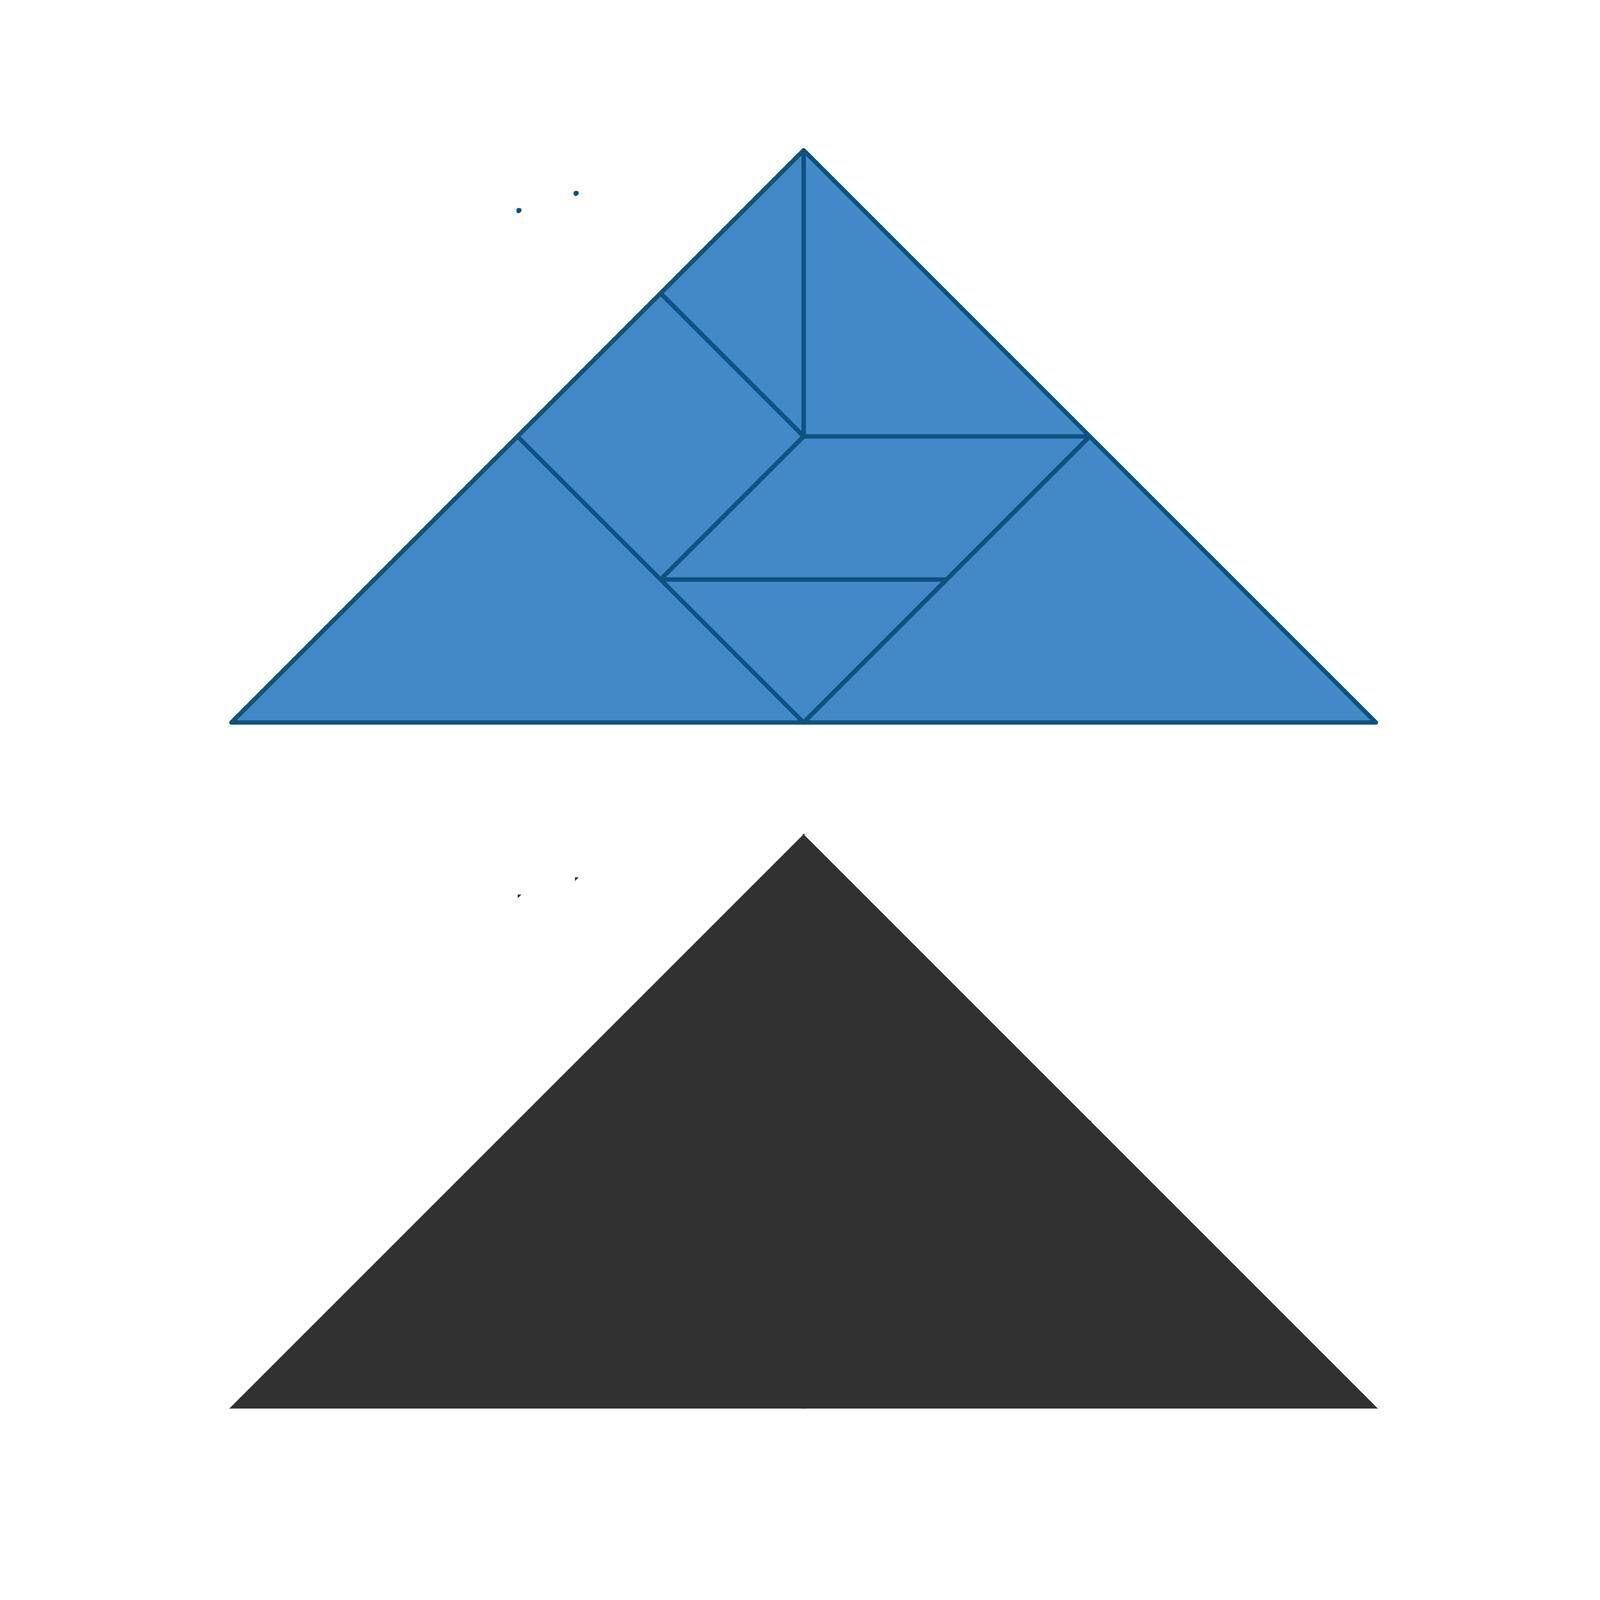 Tangram. Traditional Chinese dissection puzzle, seven tiling pieces - geometric shapes: triangles, square rhombus , parallelogram. Board game for kids that helps to develop analytical skills.